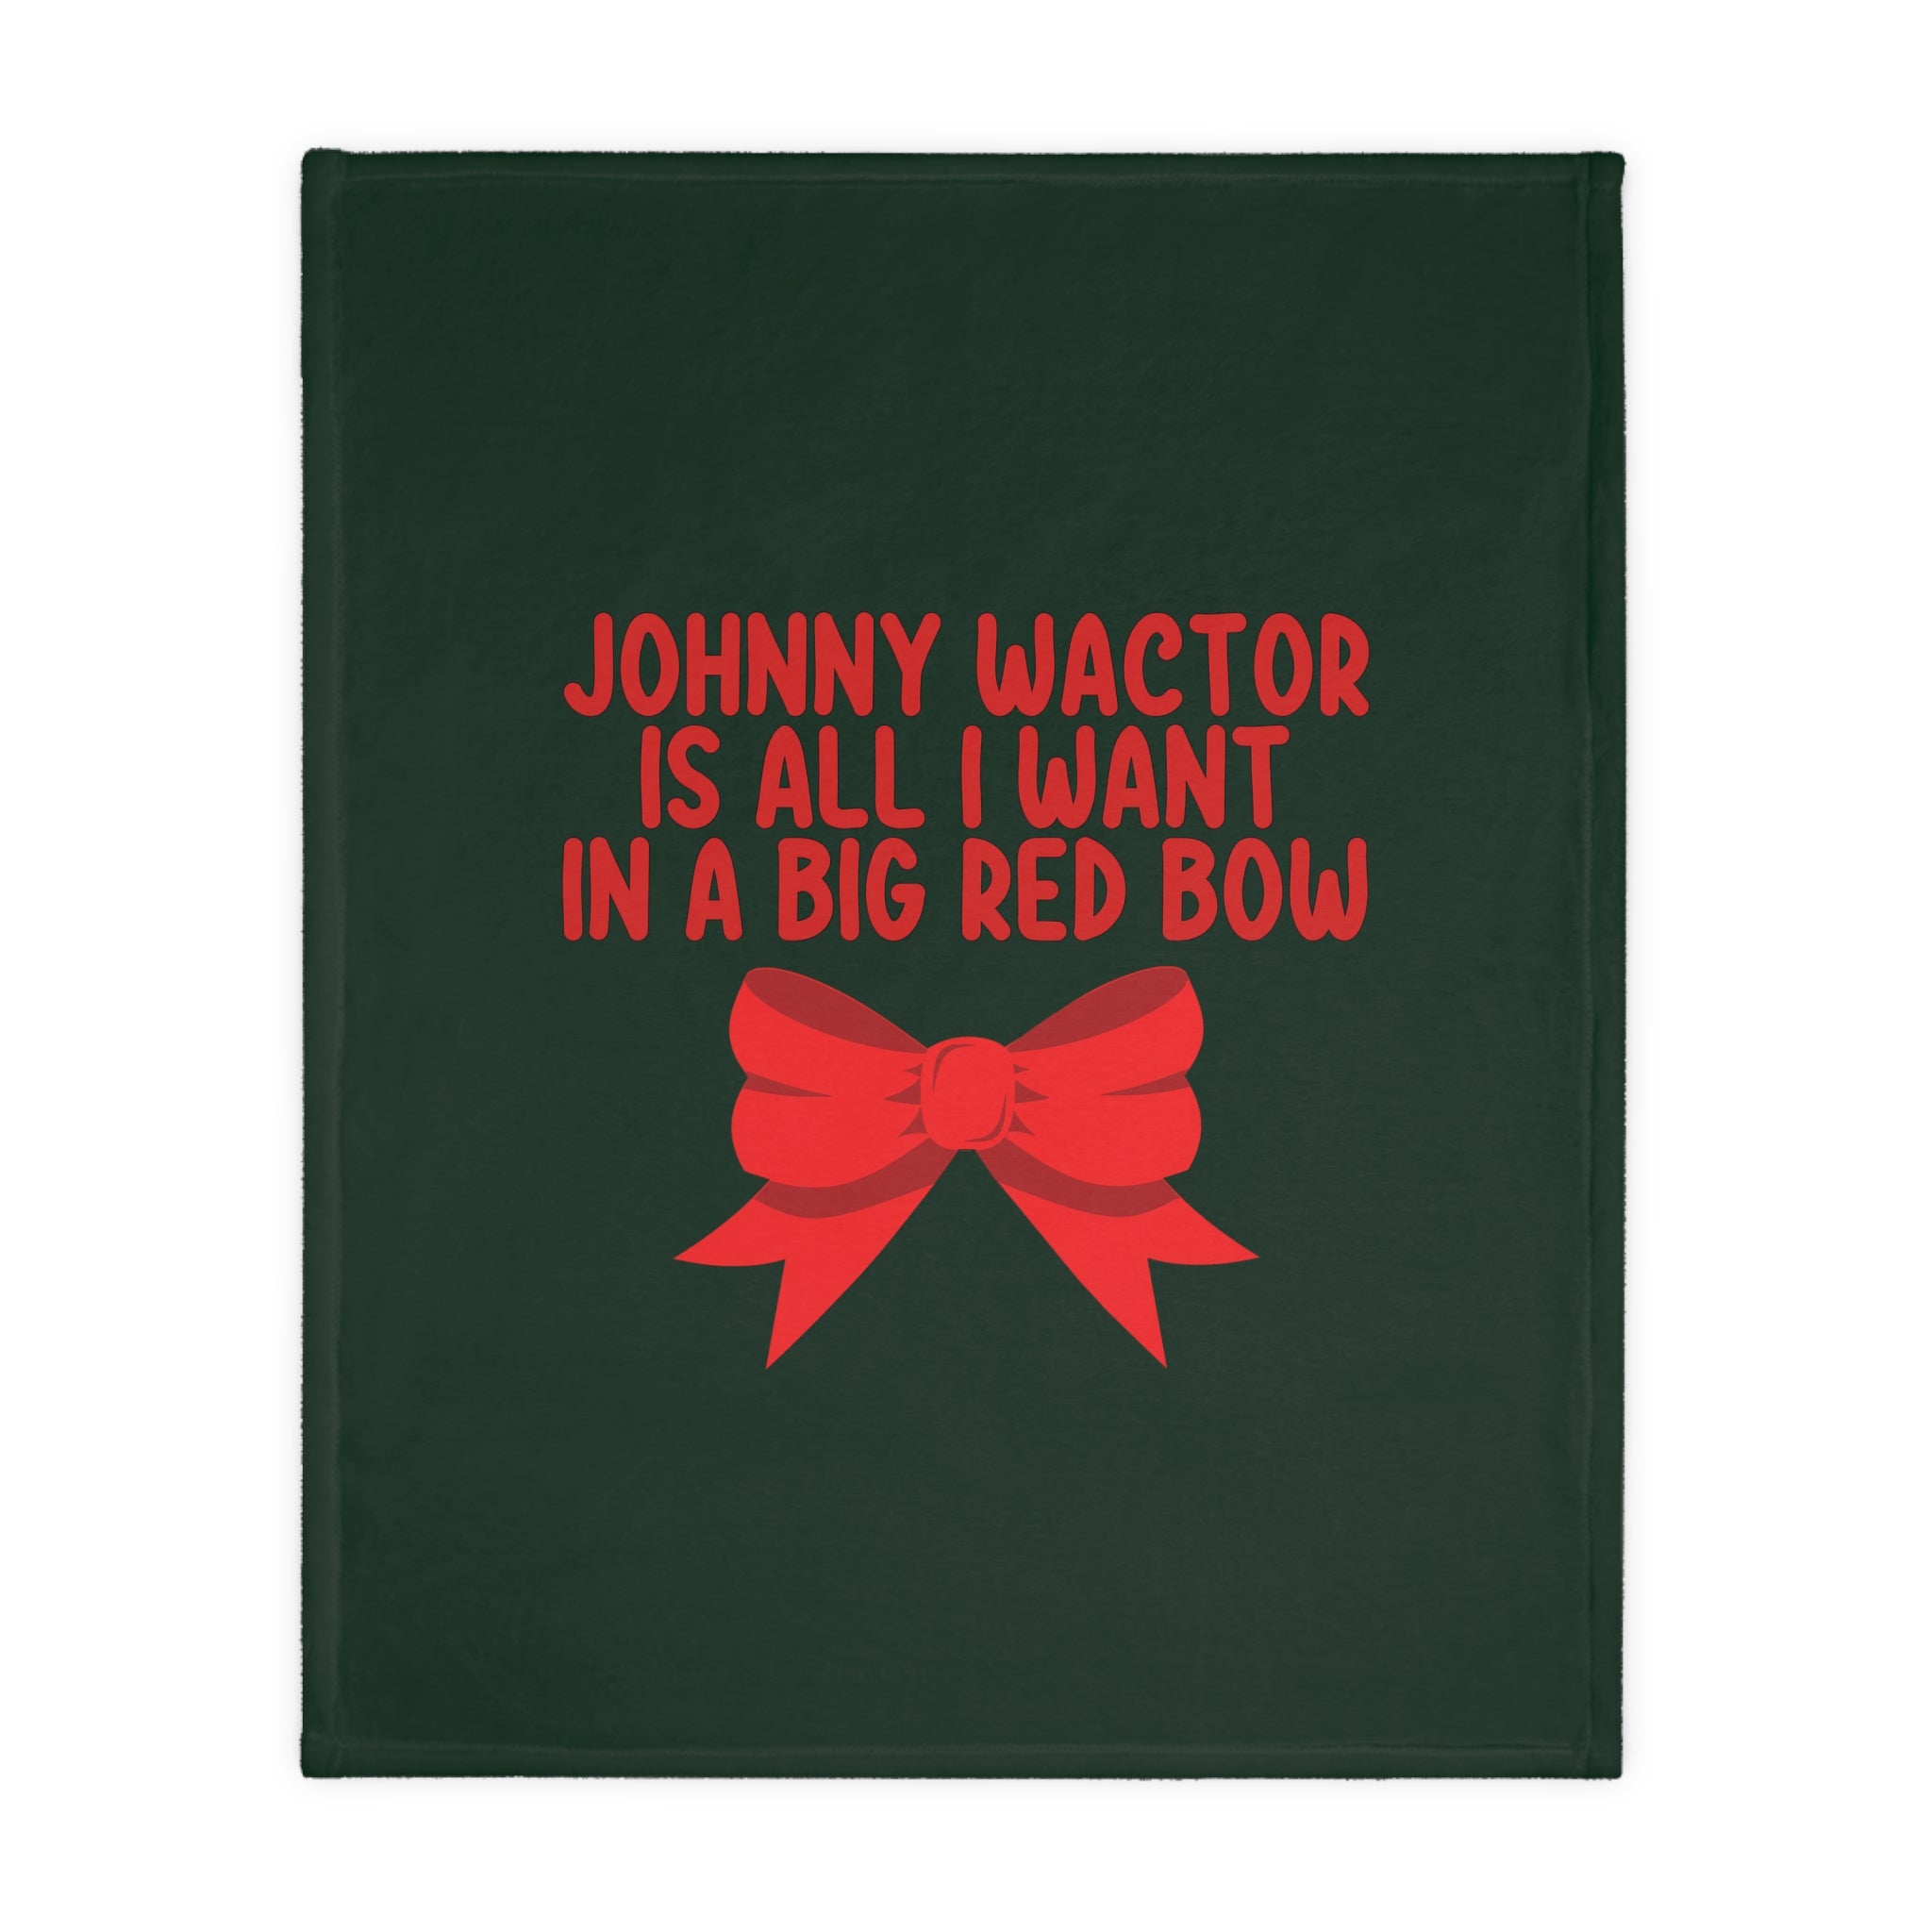 Johnny Wactor is All I Want in a Big Red Bow Velveteen Minky Blanket (Two-sided print)